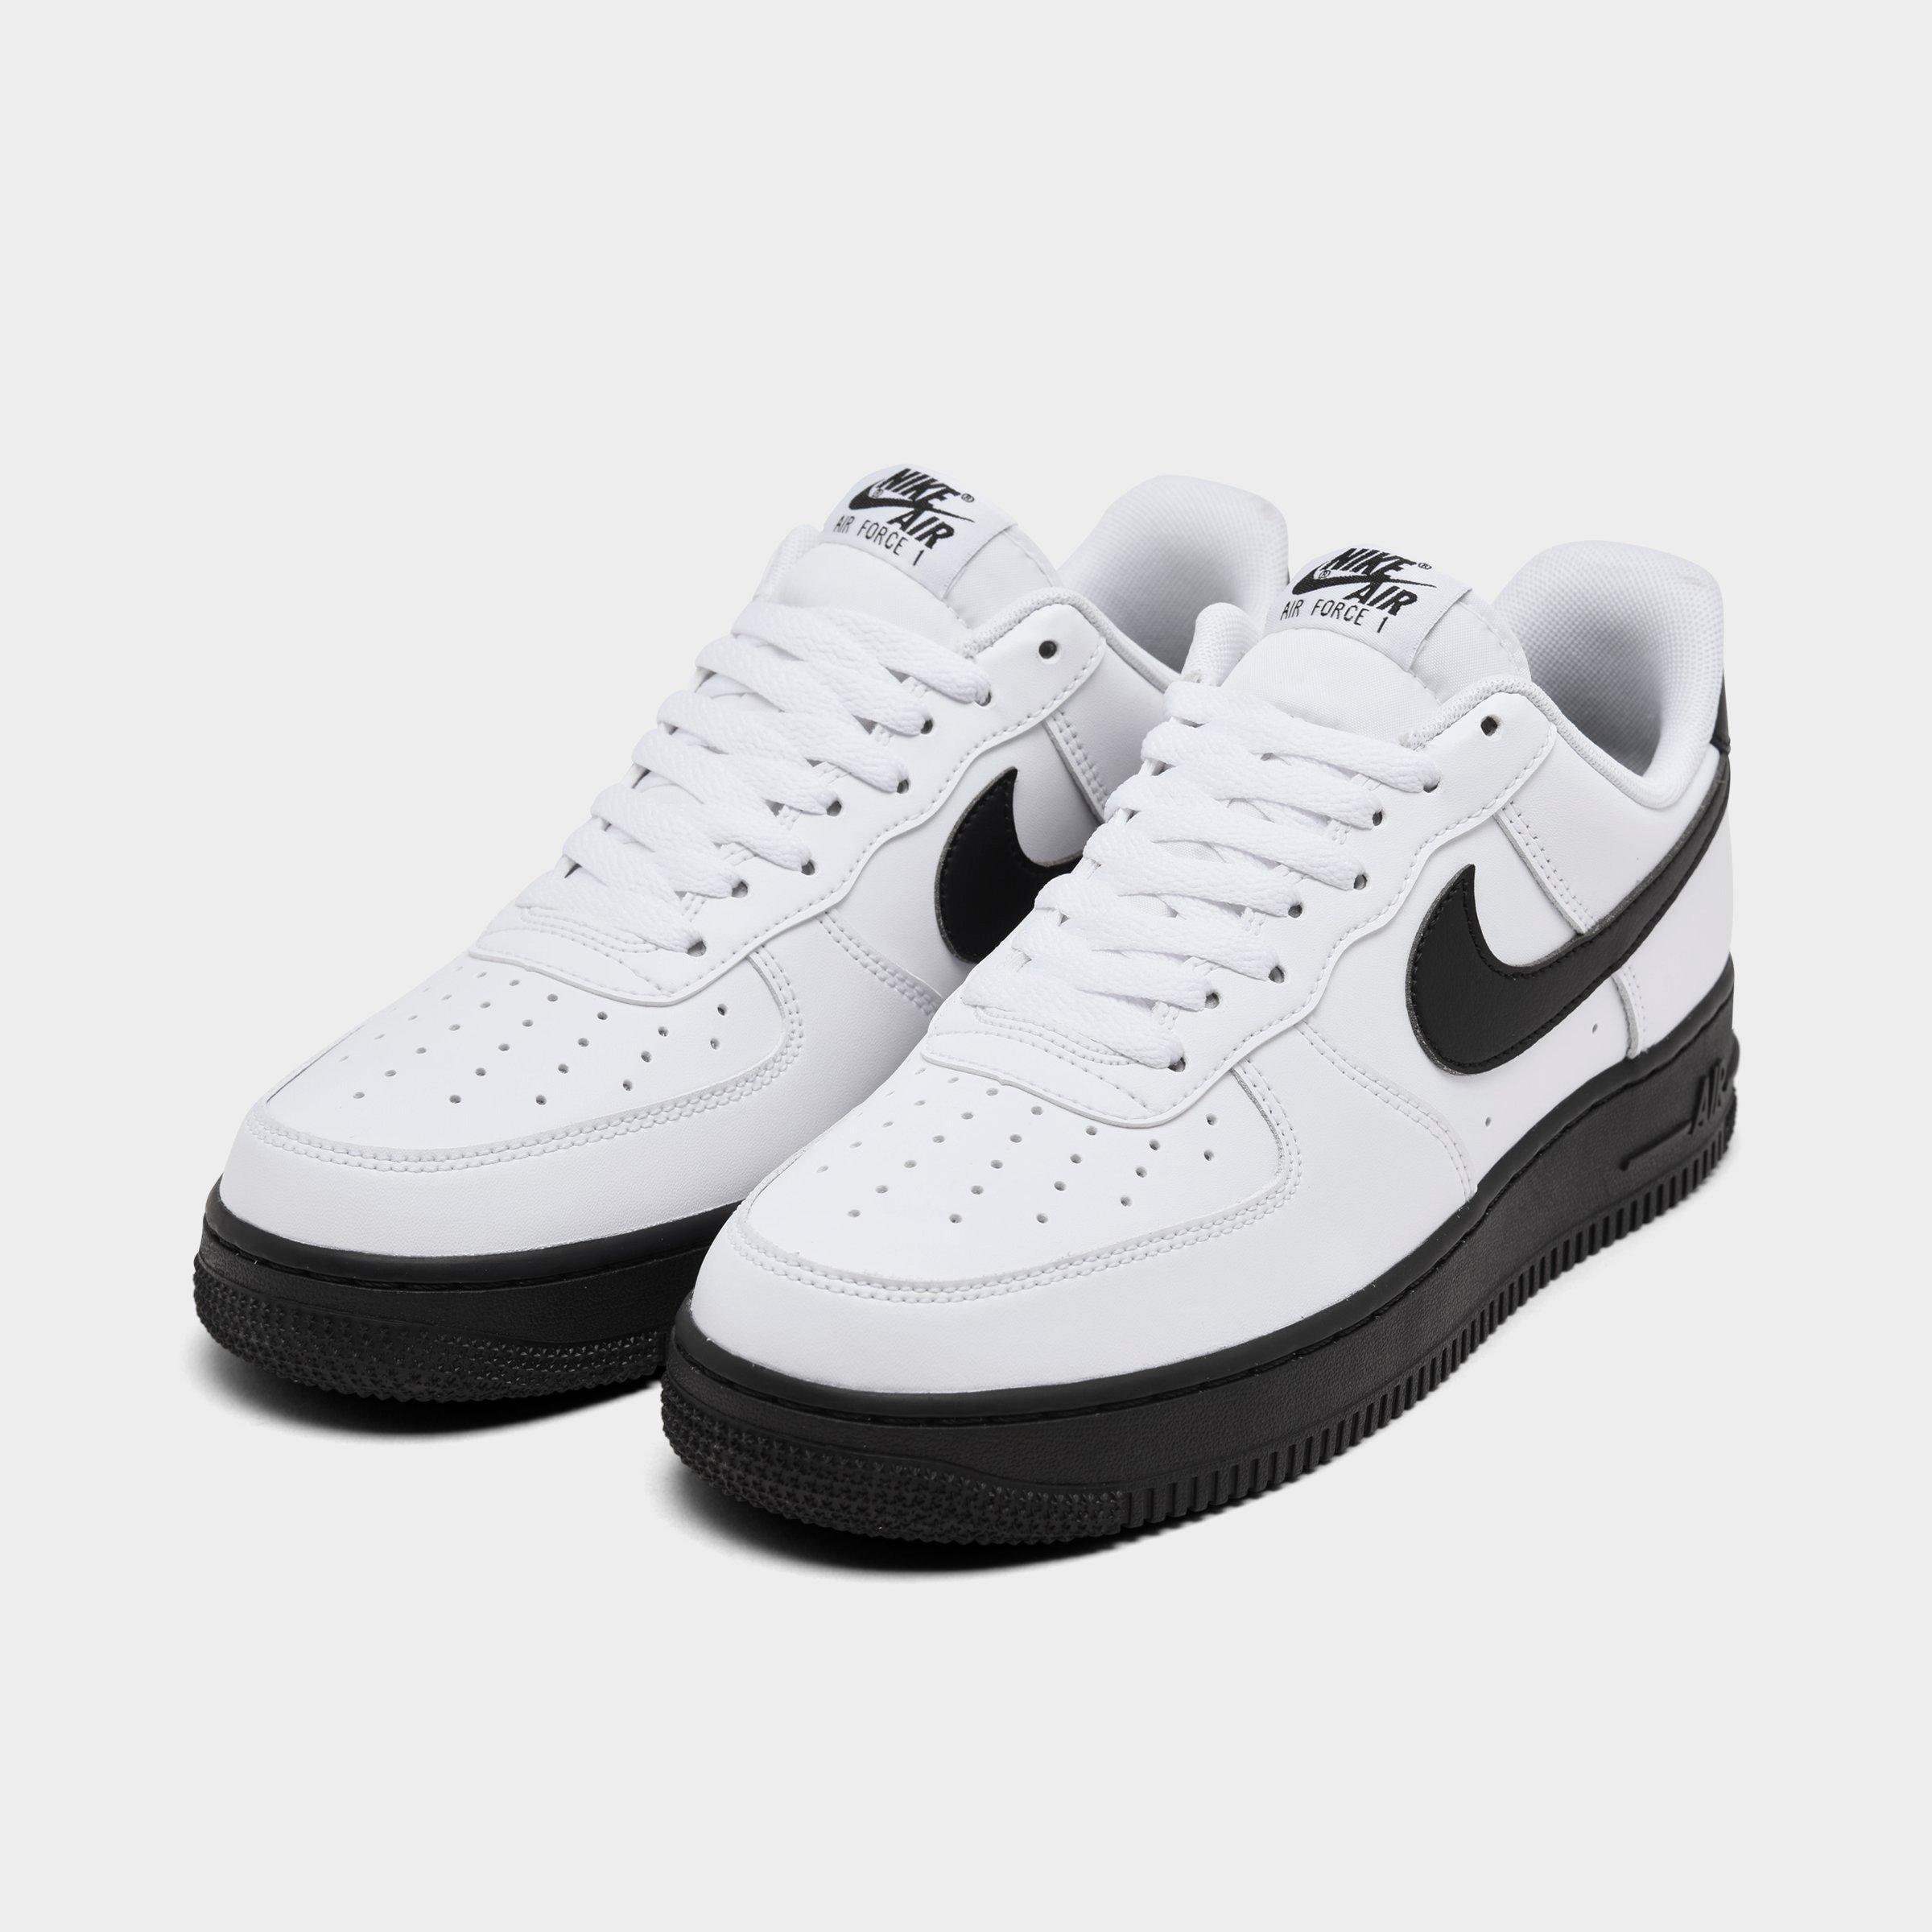 finish line air force 1 mens